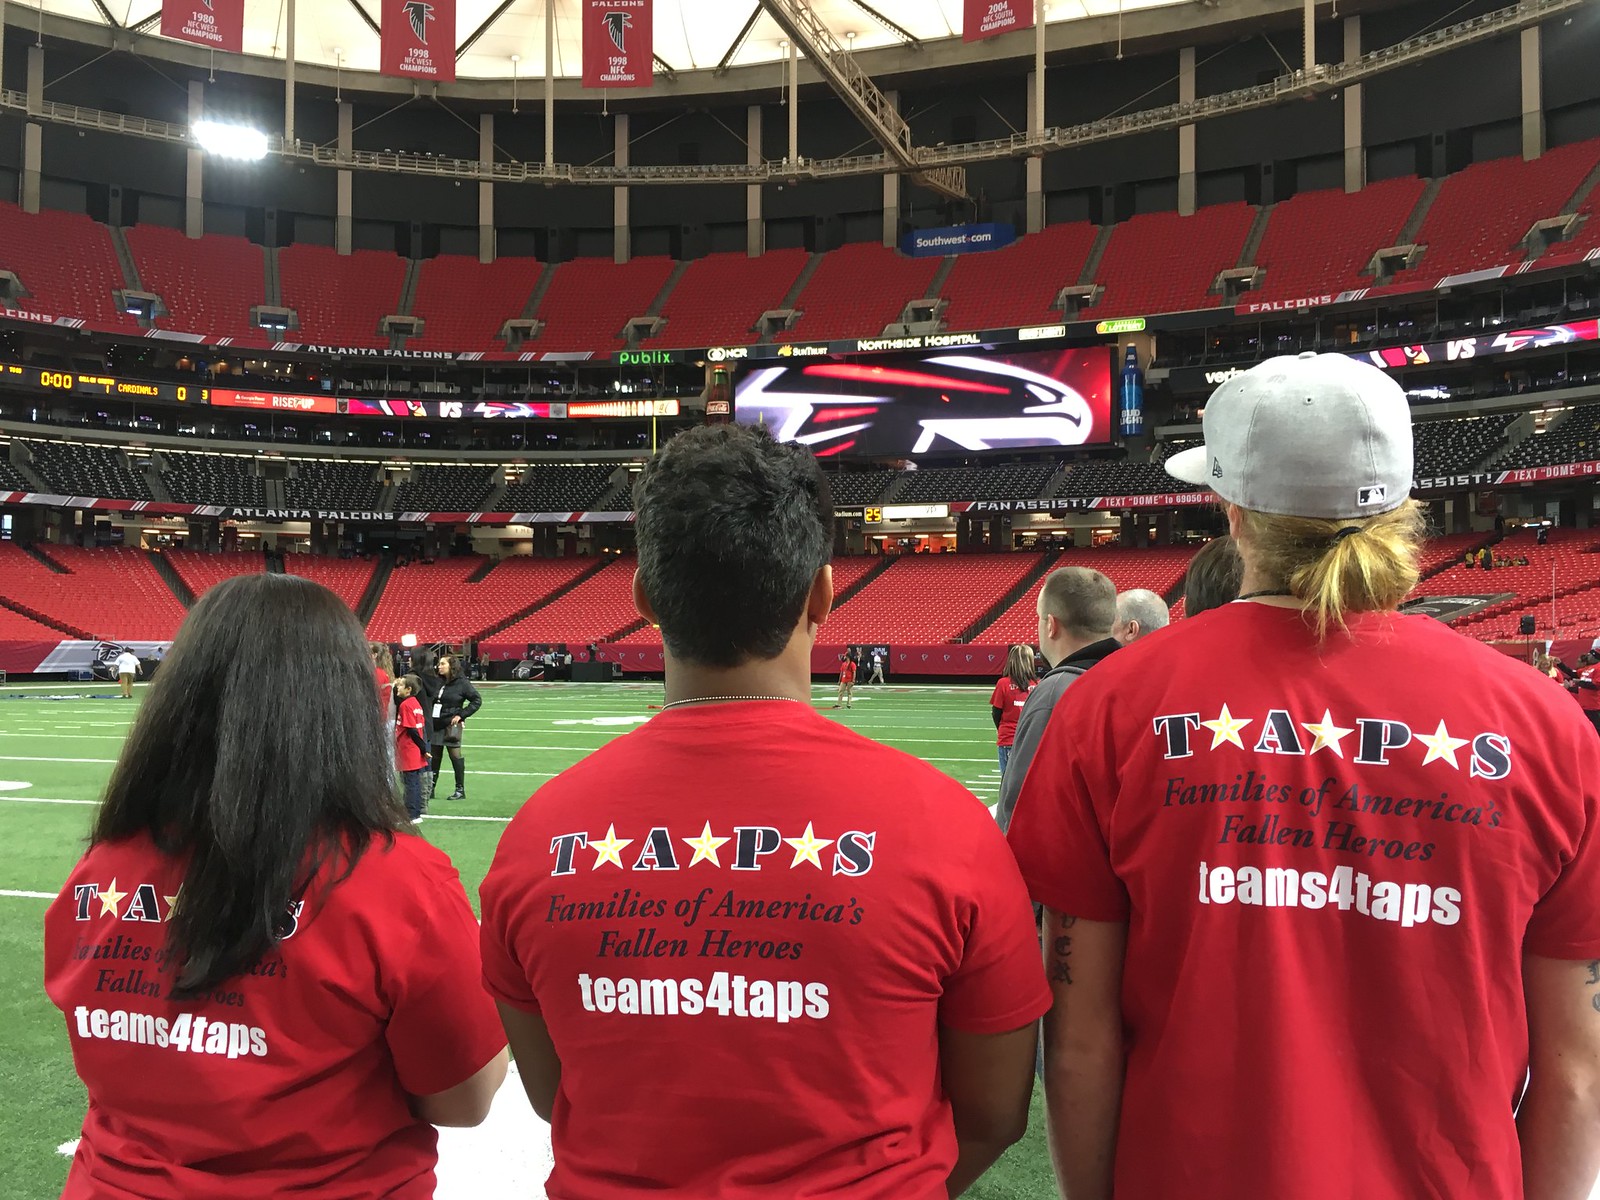 2016_T4T_ATL Falcons Game Day 13